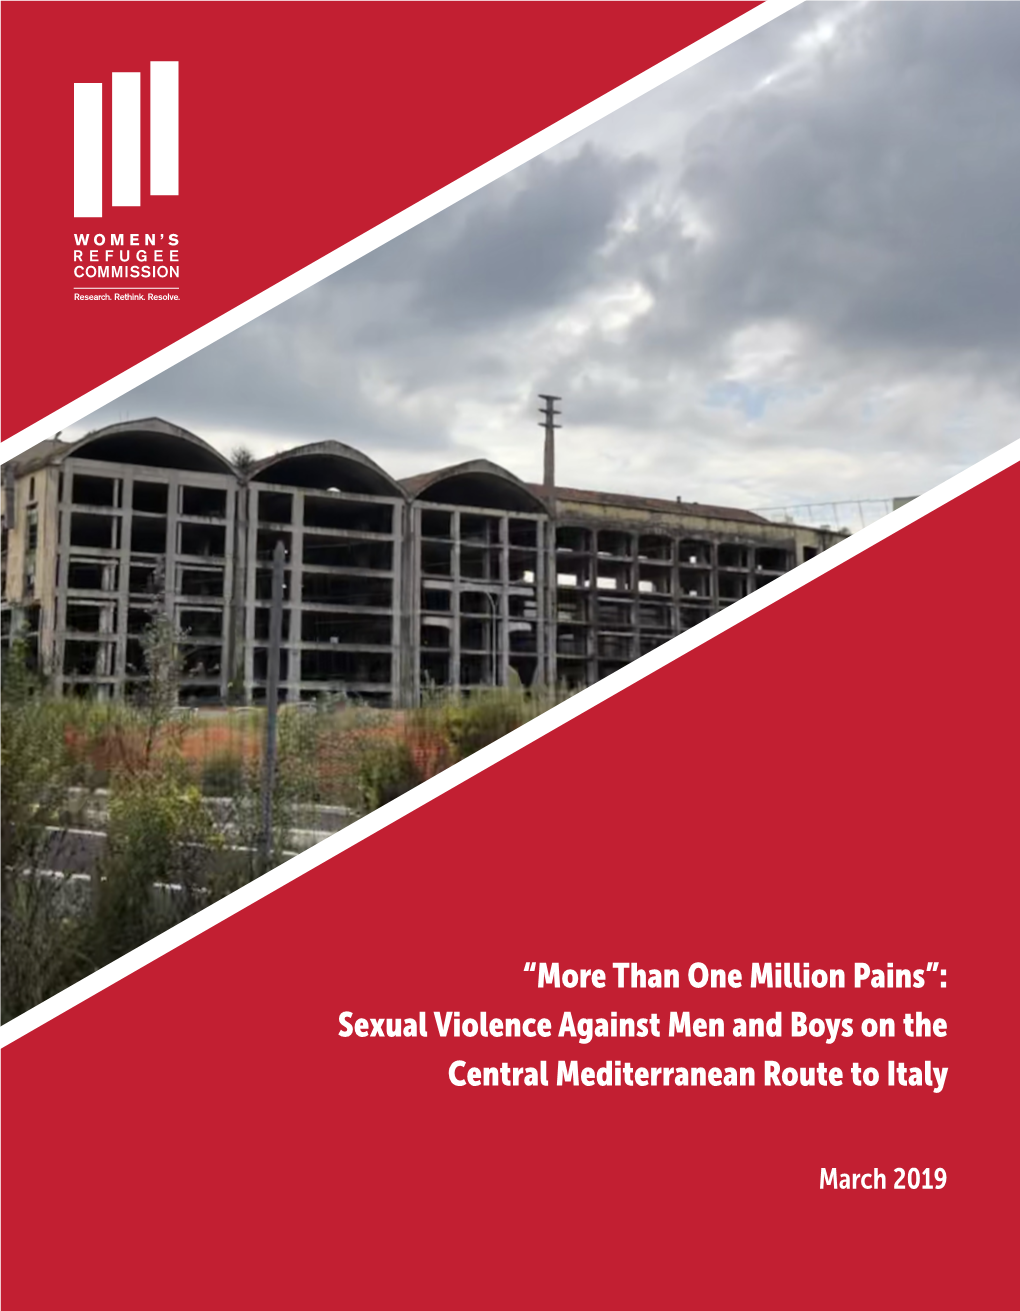 Than One Million Pains”: Sexual Violence Against Men and Boys on the Central Mediterranean Route to Italy